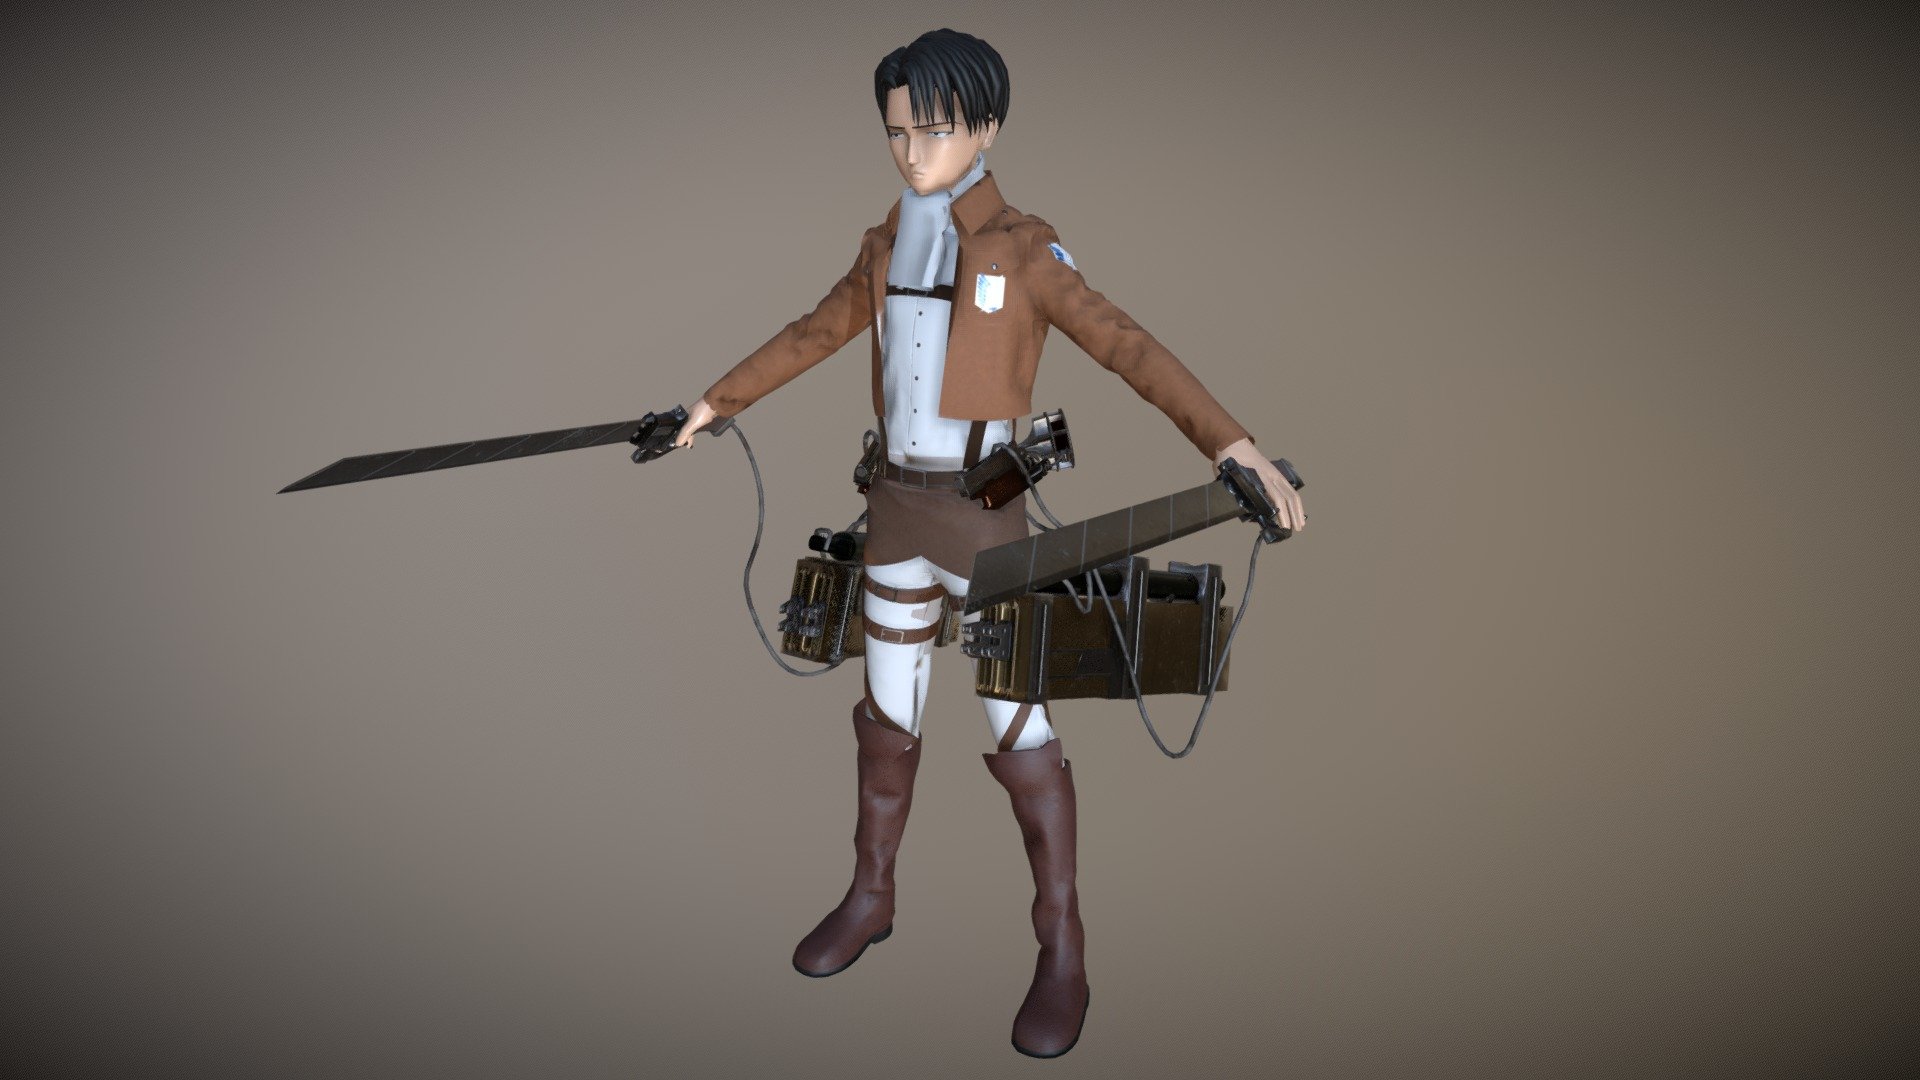 Character from Attack On Titan. Levi Ackerman
Created on Autodesk Maya, Substance Painter and Marvelous Designer.

Hope you like it! - Levi Ackerman Attack On Titan - 3D model by amiruler 3d model